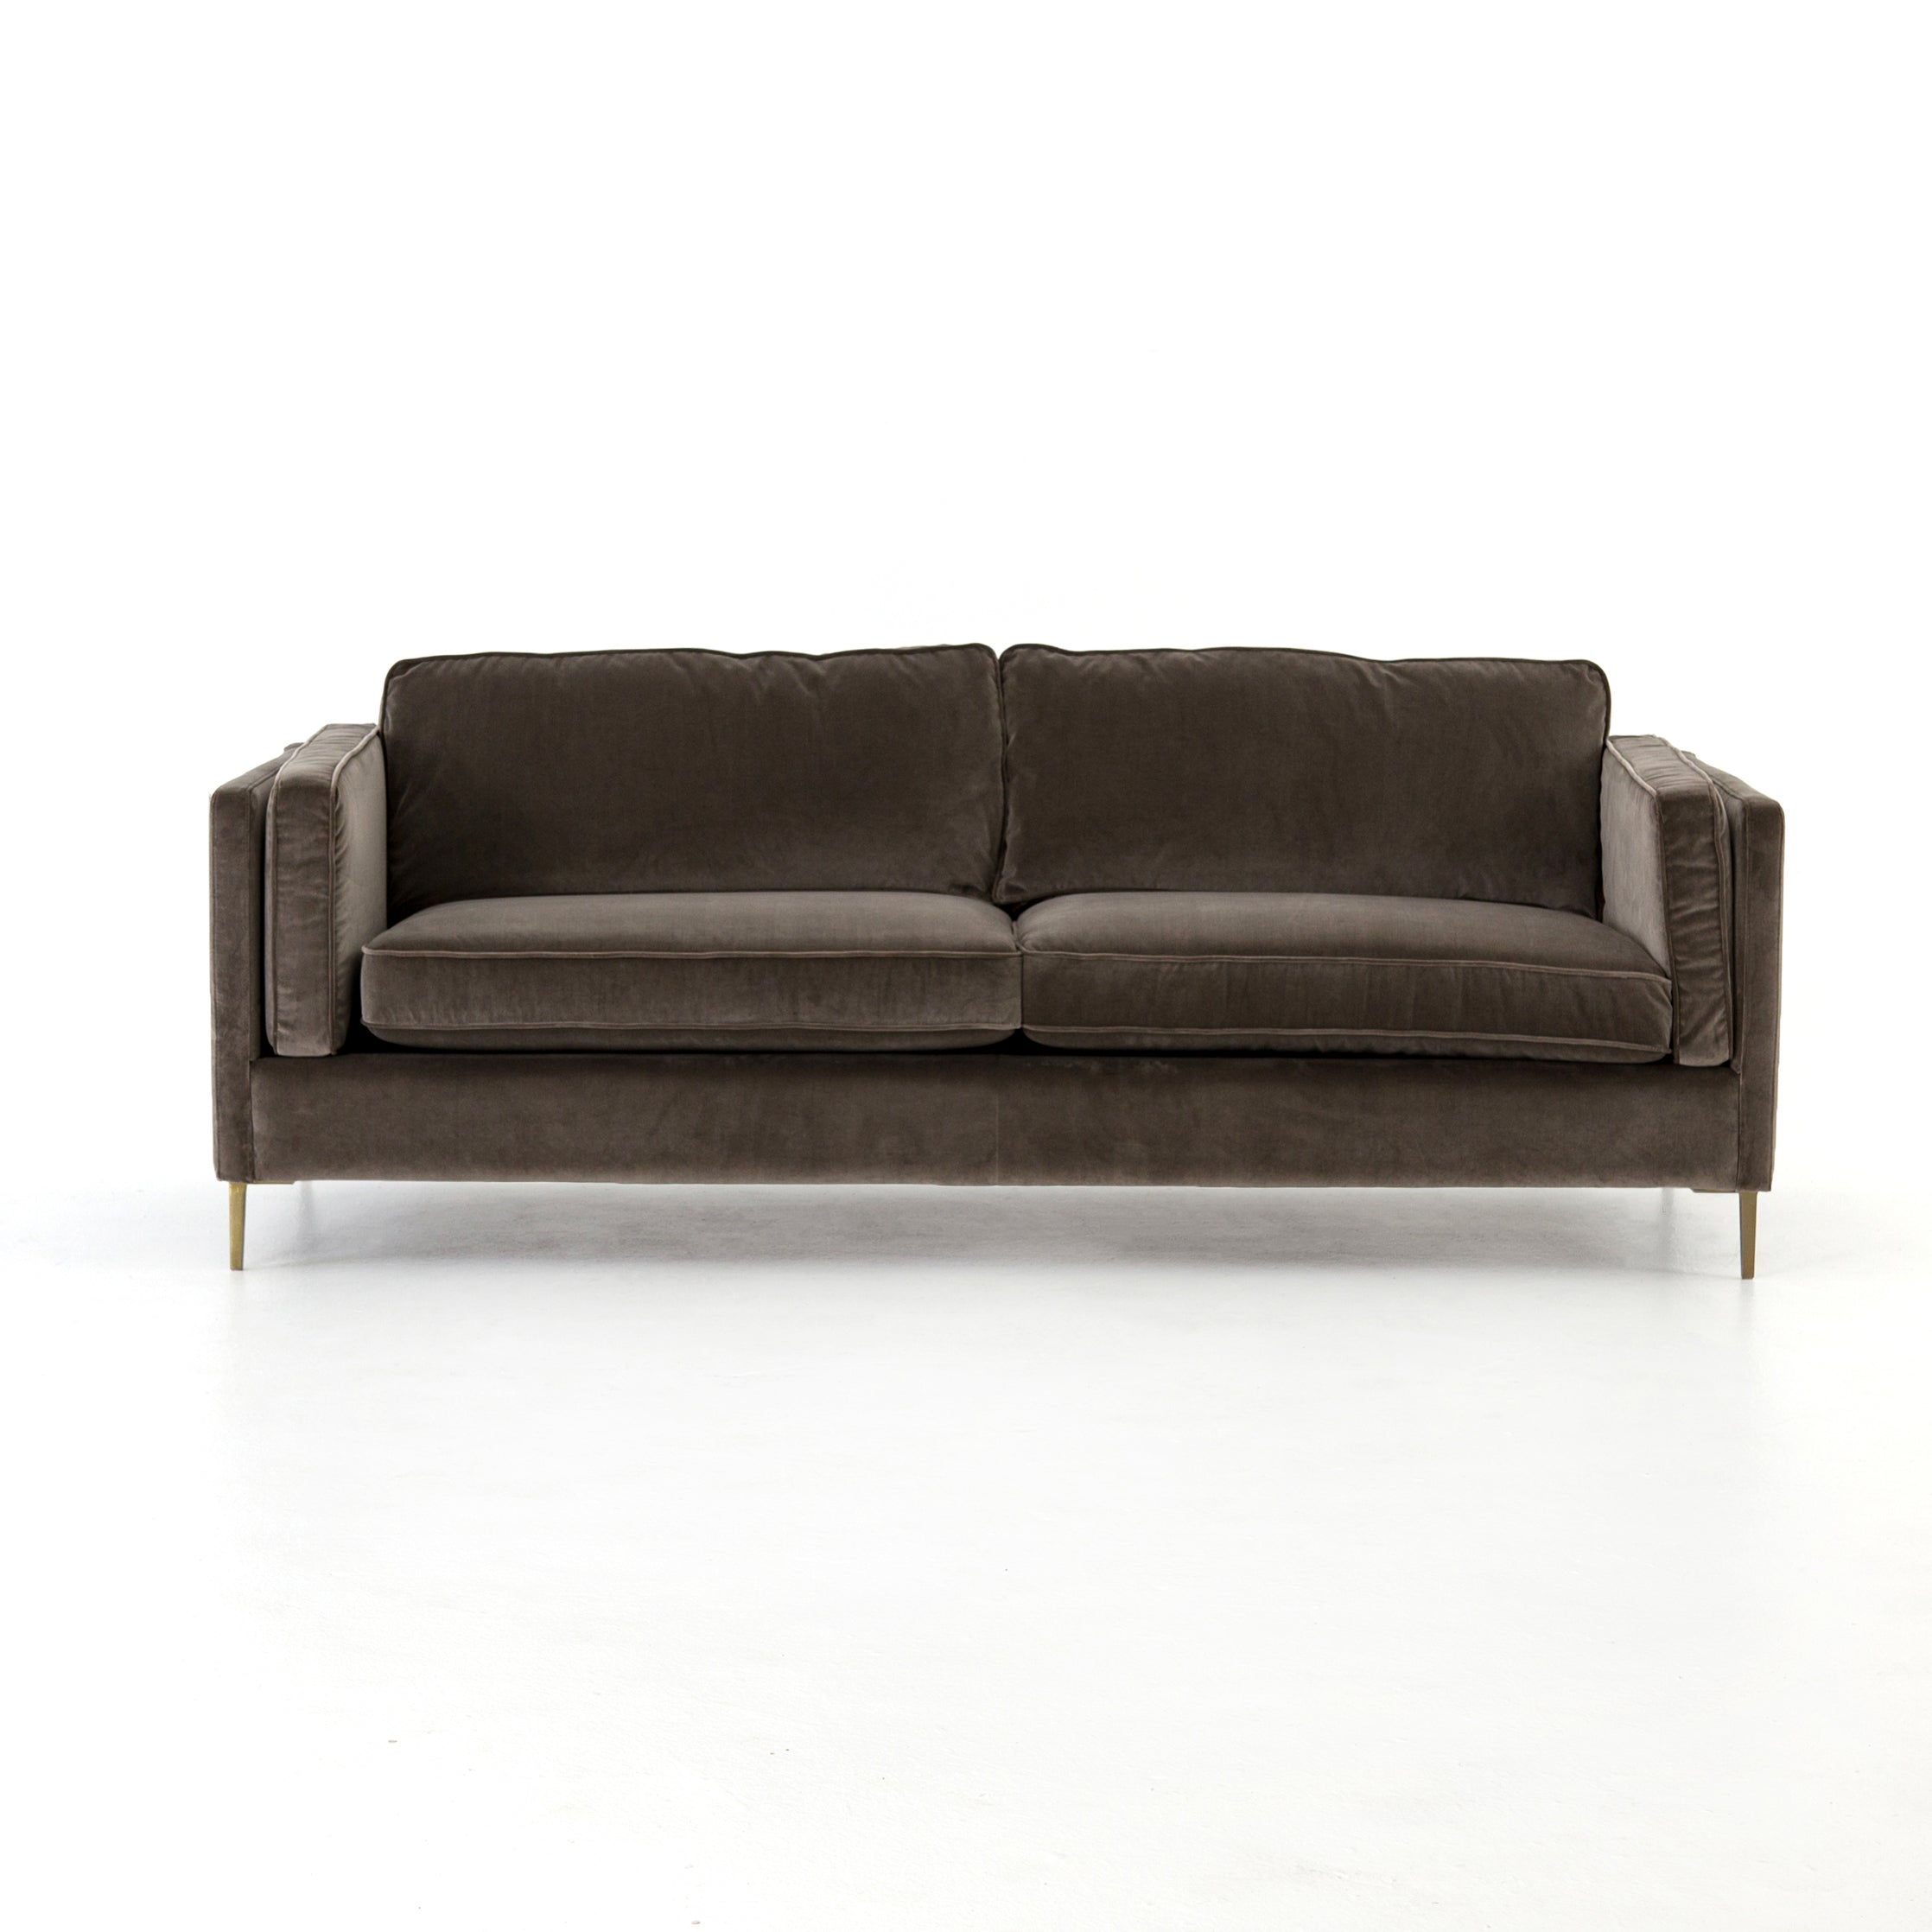 We love the plush brich-grey upholstery of this Emery Sofa - Sapphire Birch. The slim legs are finished in a gorgeous antique brass, for a sophisticated look for any living room or lounge area.   Overall Dimensions: 84.00"w x 36.00"d x 33.00"h